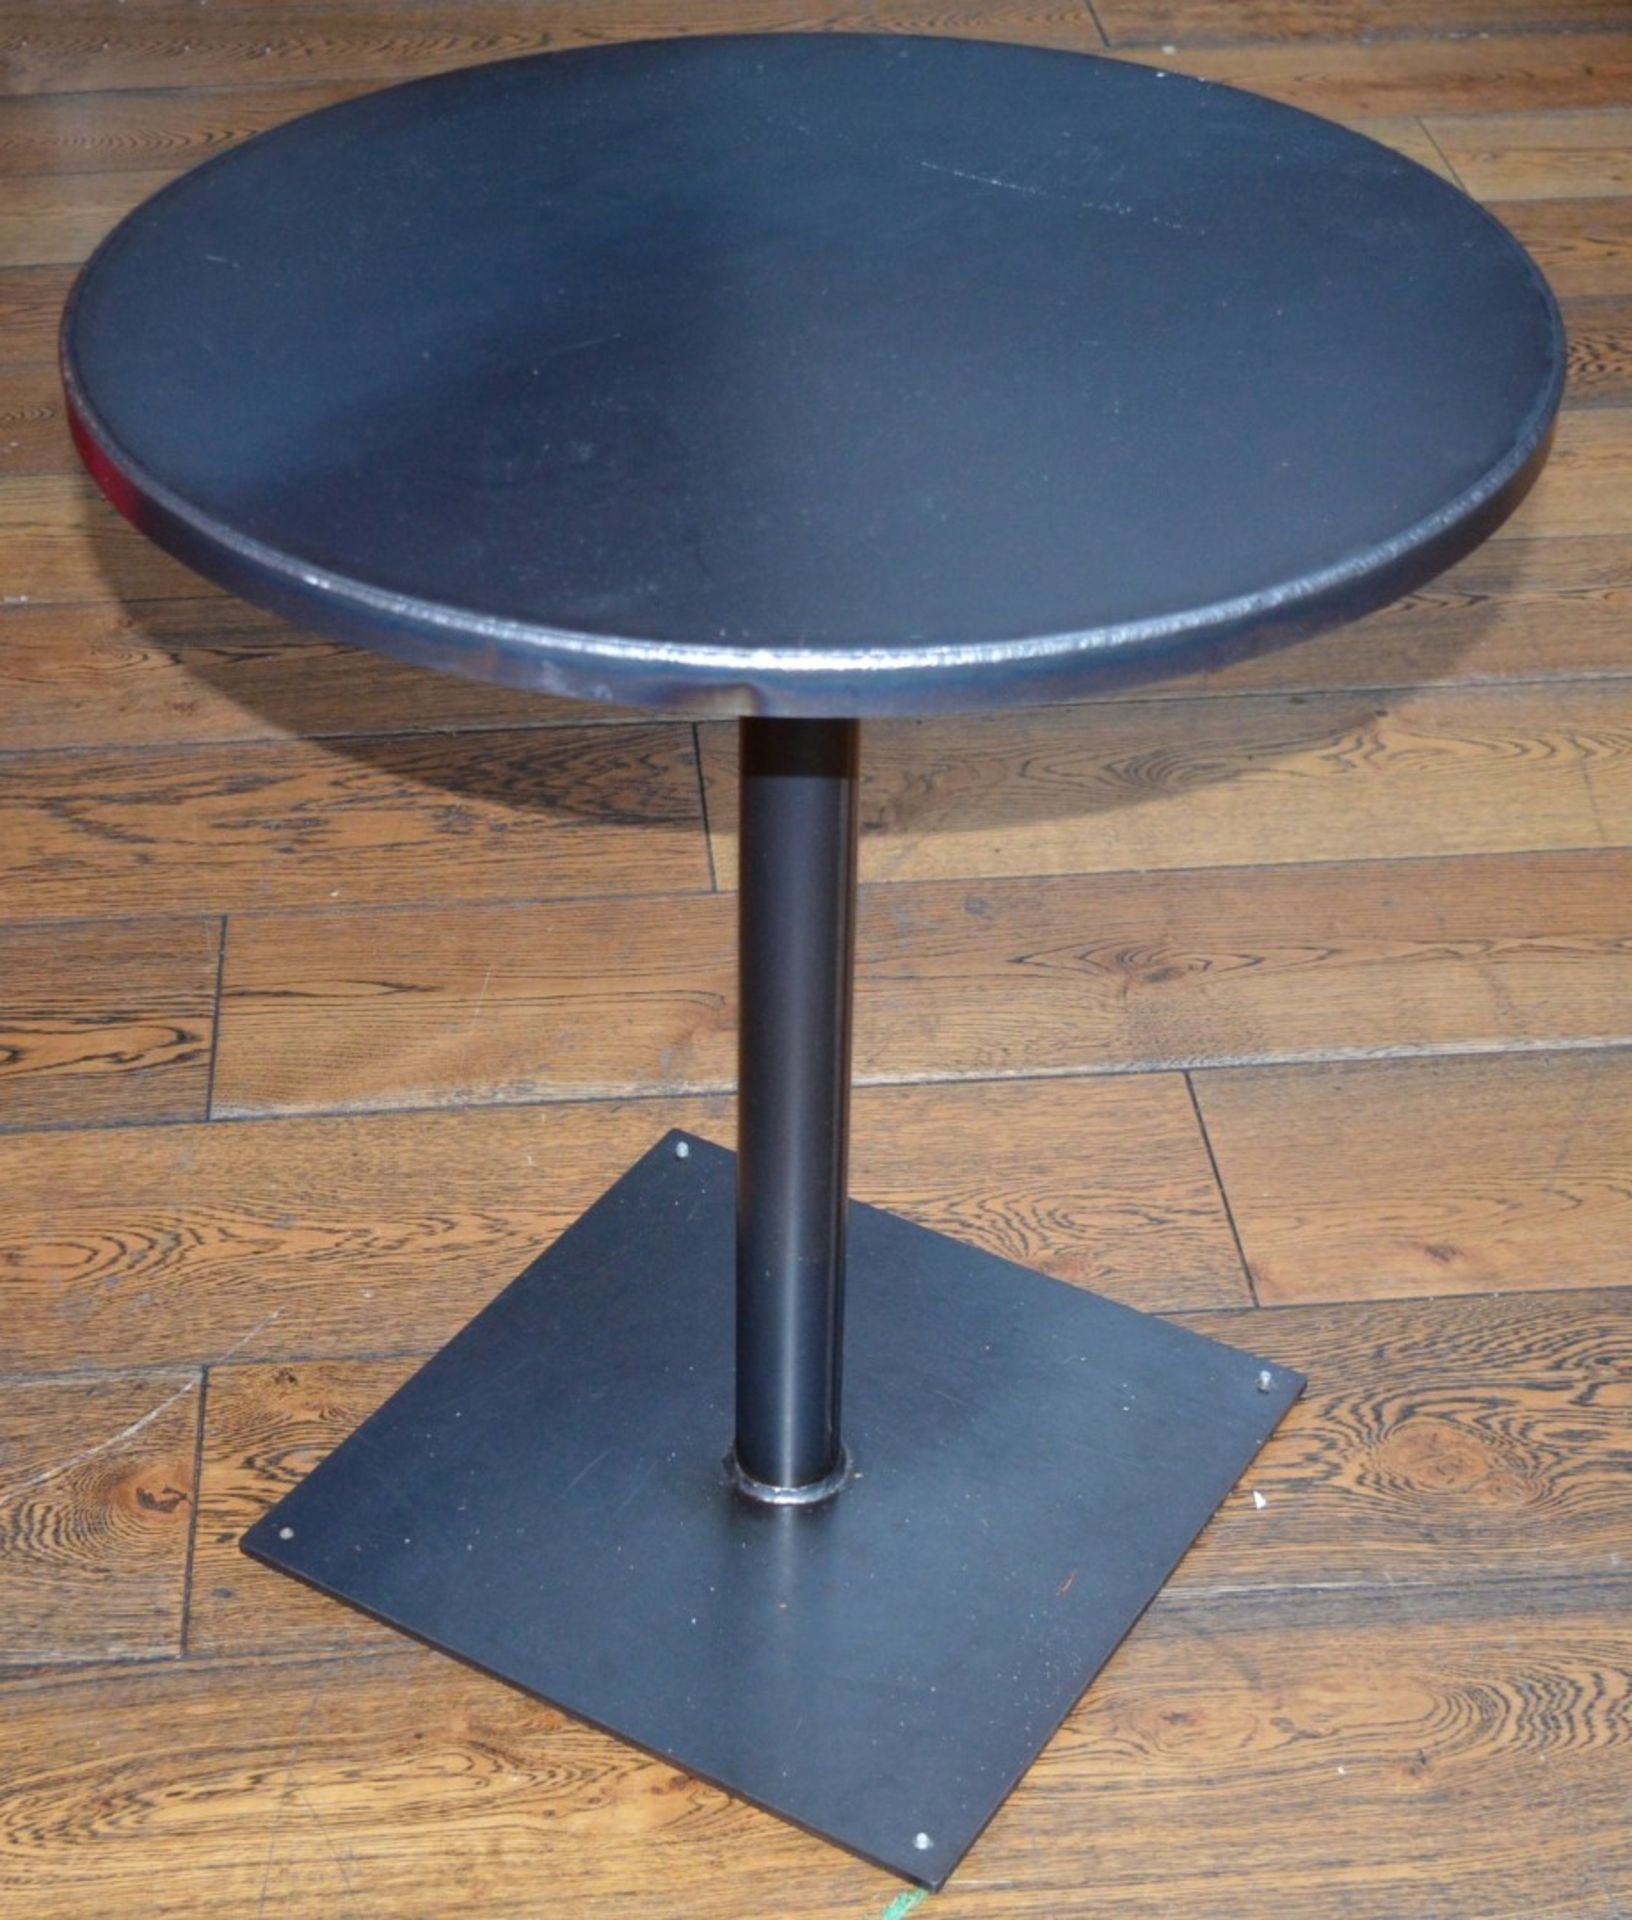 3 x Bistro Drinks Tables - Compact Heavy Tables With Square Bases and Circular Tops - Height - Image 2 of 4